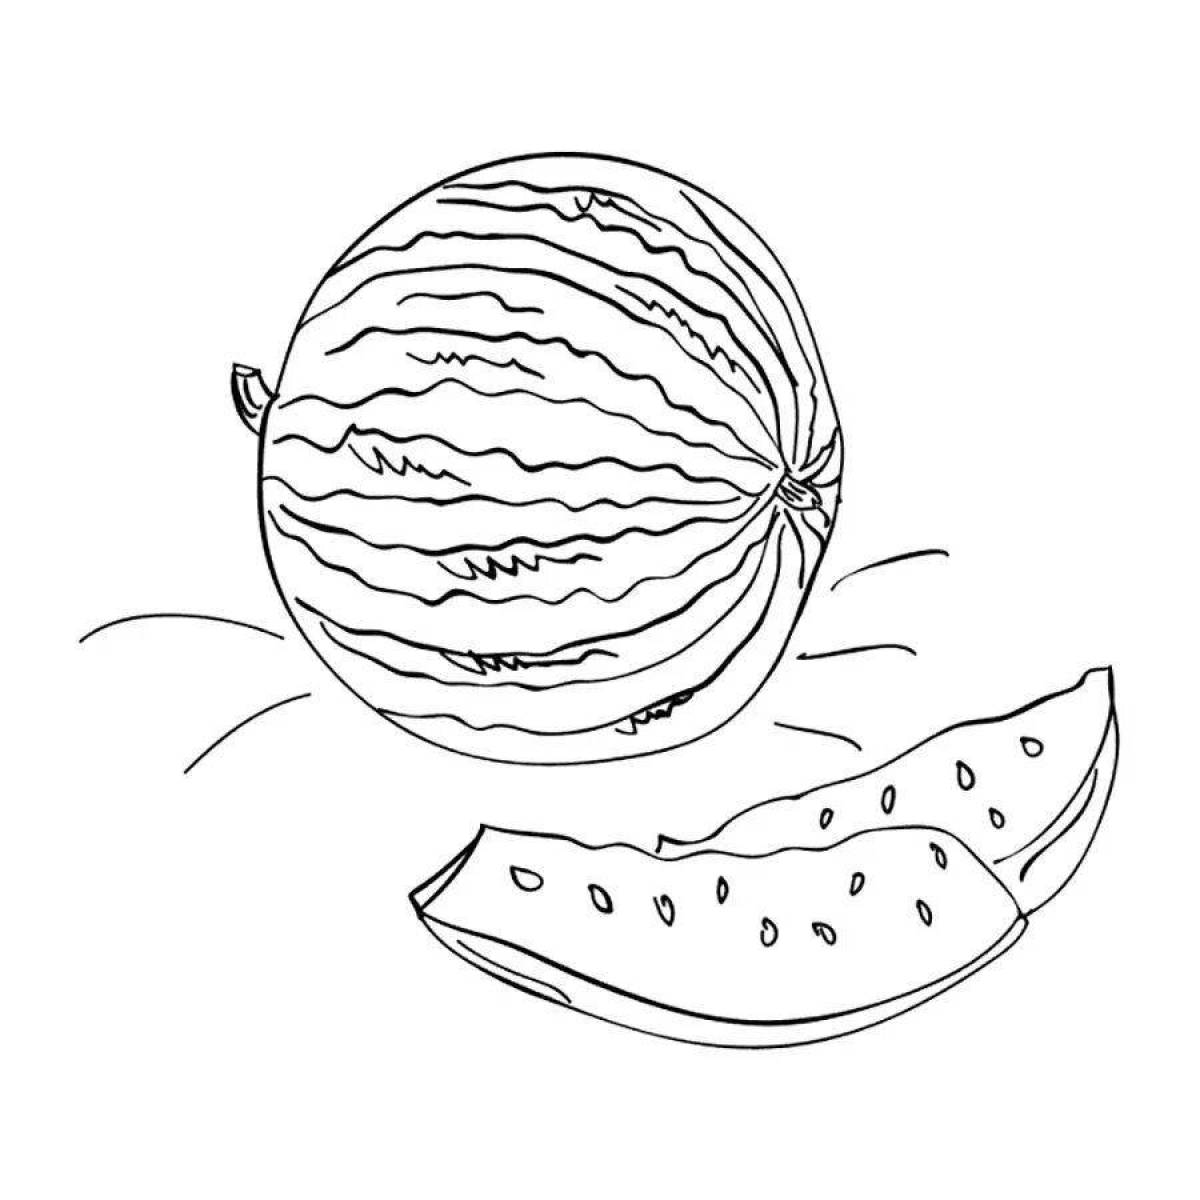 A fascinating watermelon coloring book for children 4-5 years old